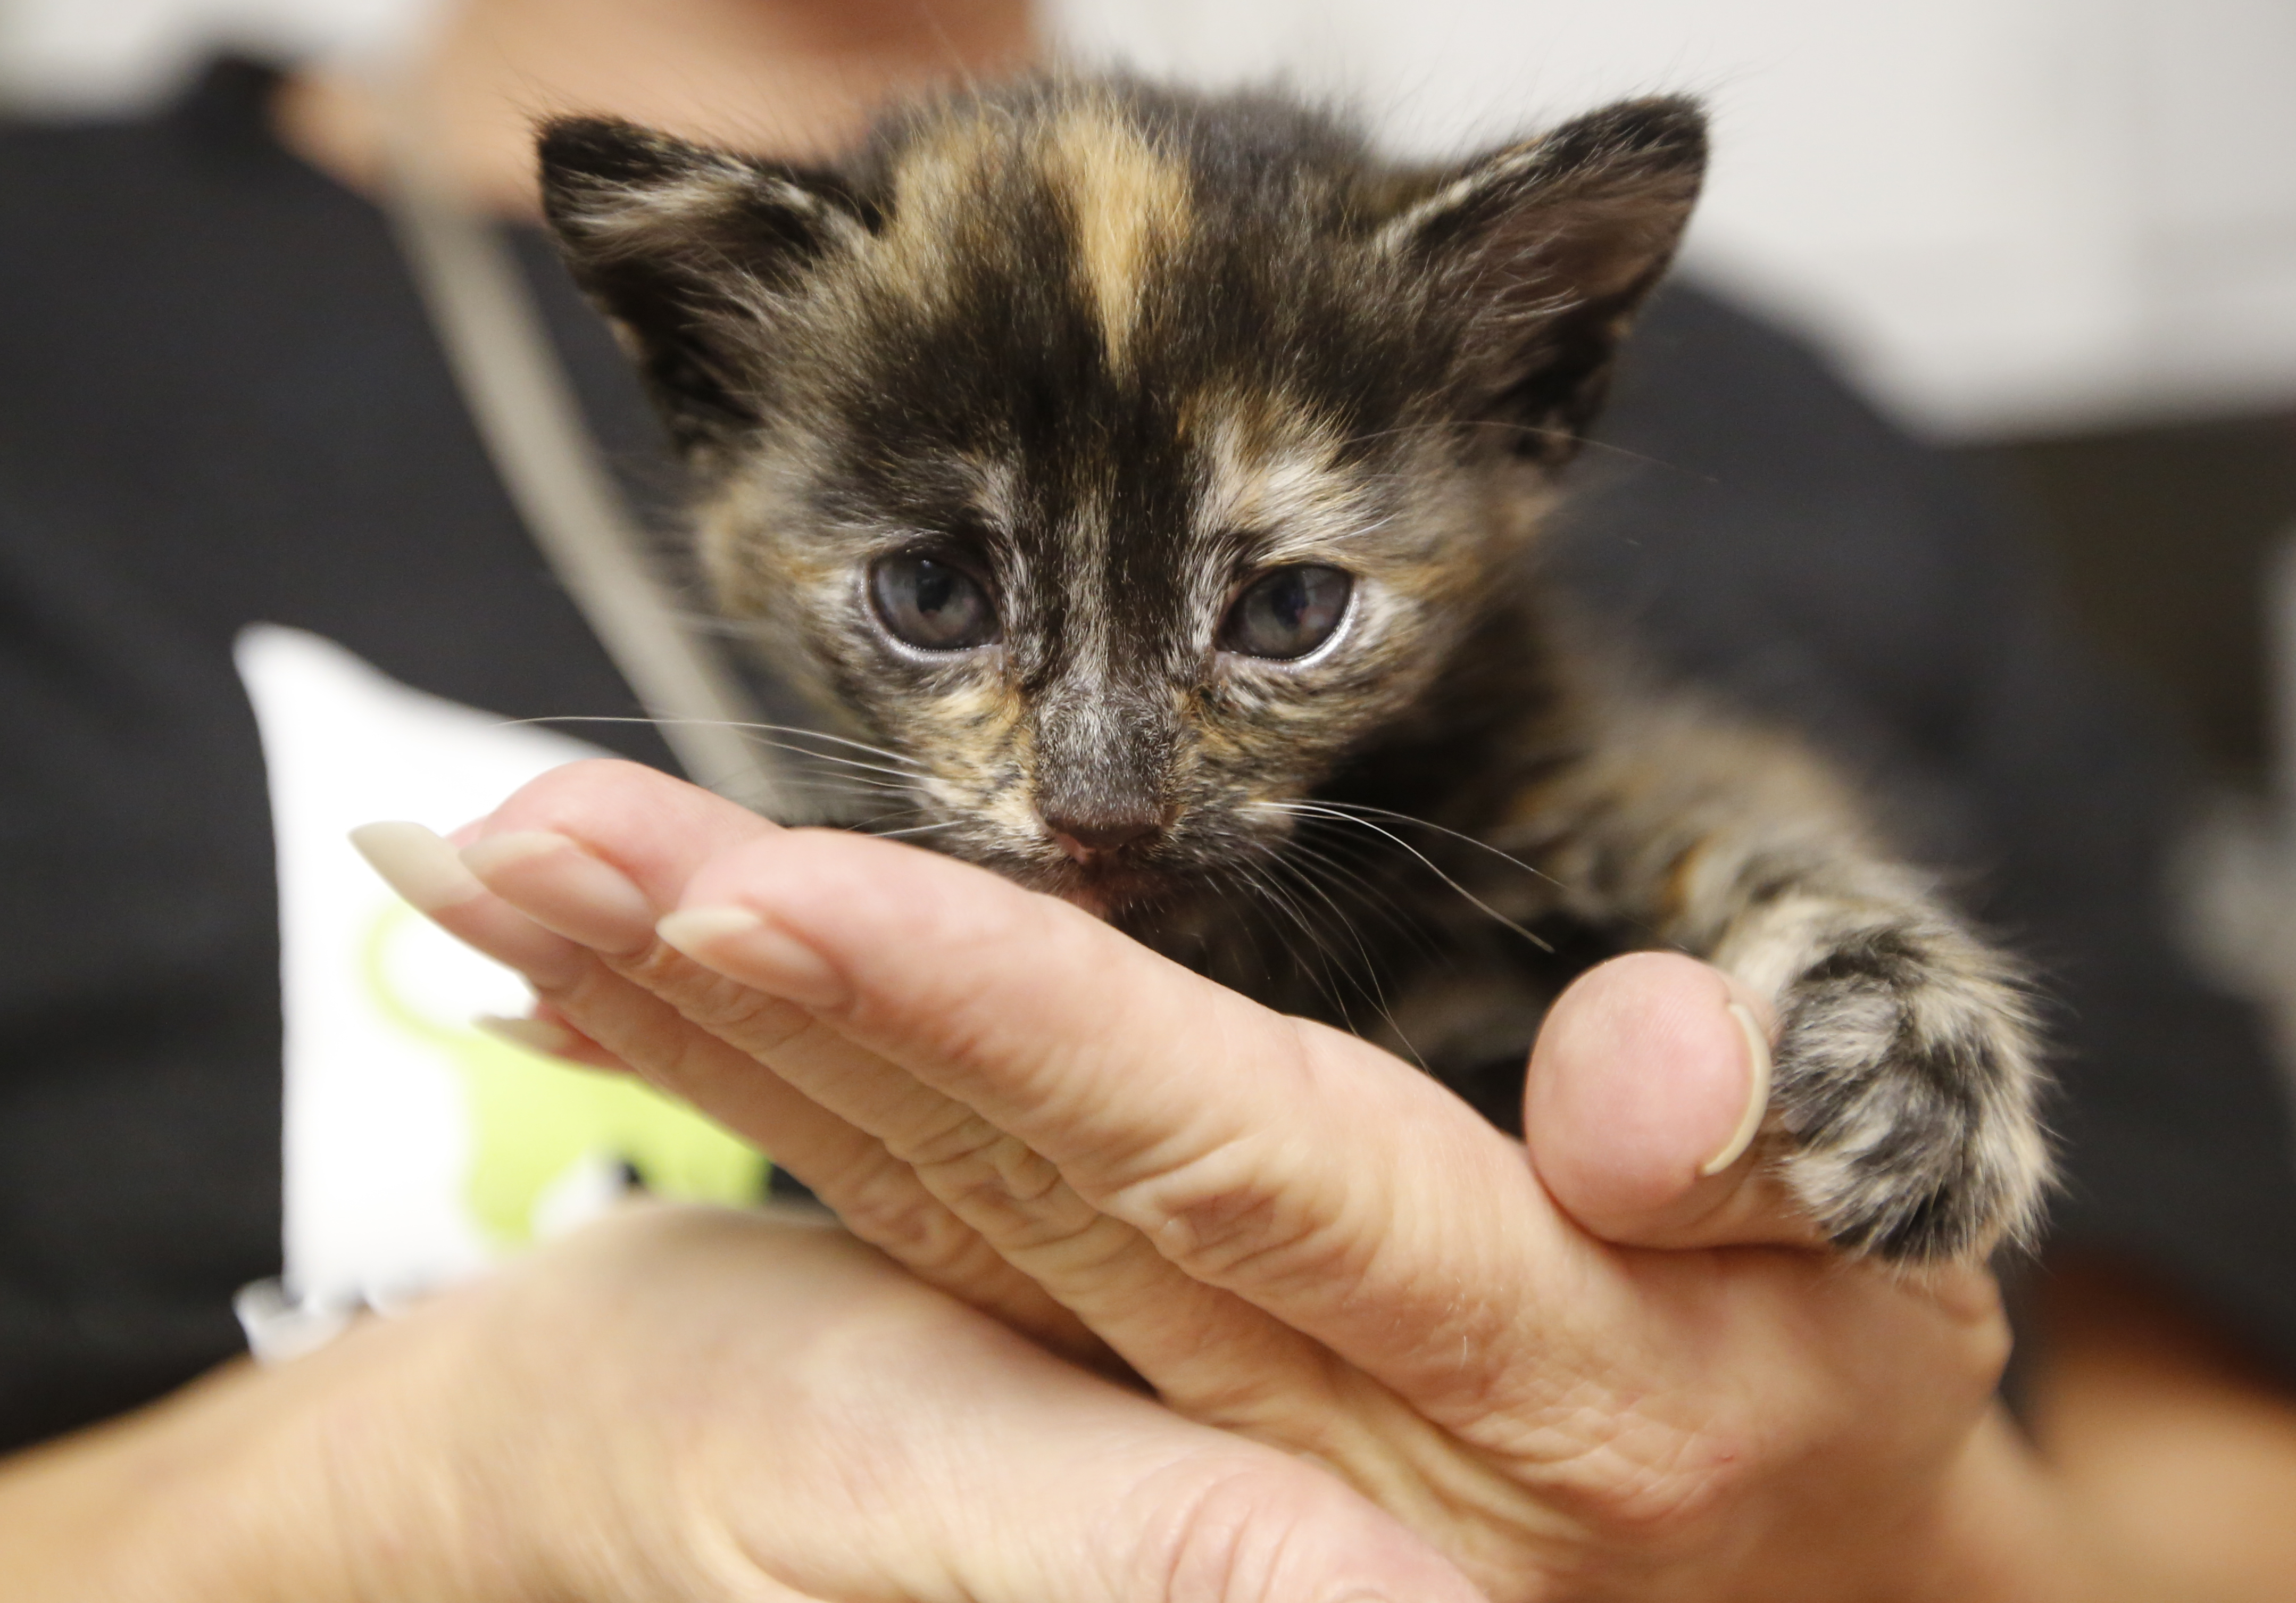 In our hands: Heart wants every shelter to be no-kill, but the head says we  have a long way to go | Chattanooga Times Free Press